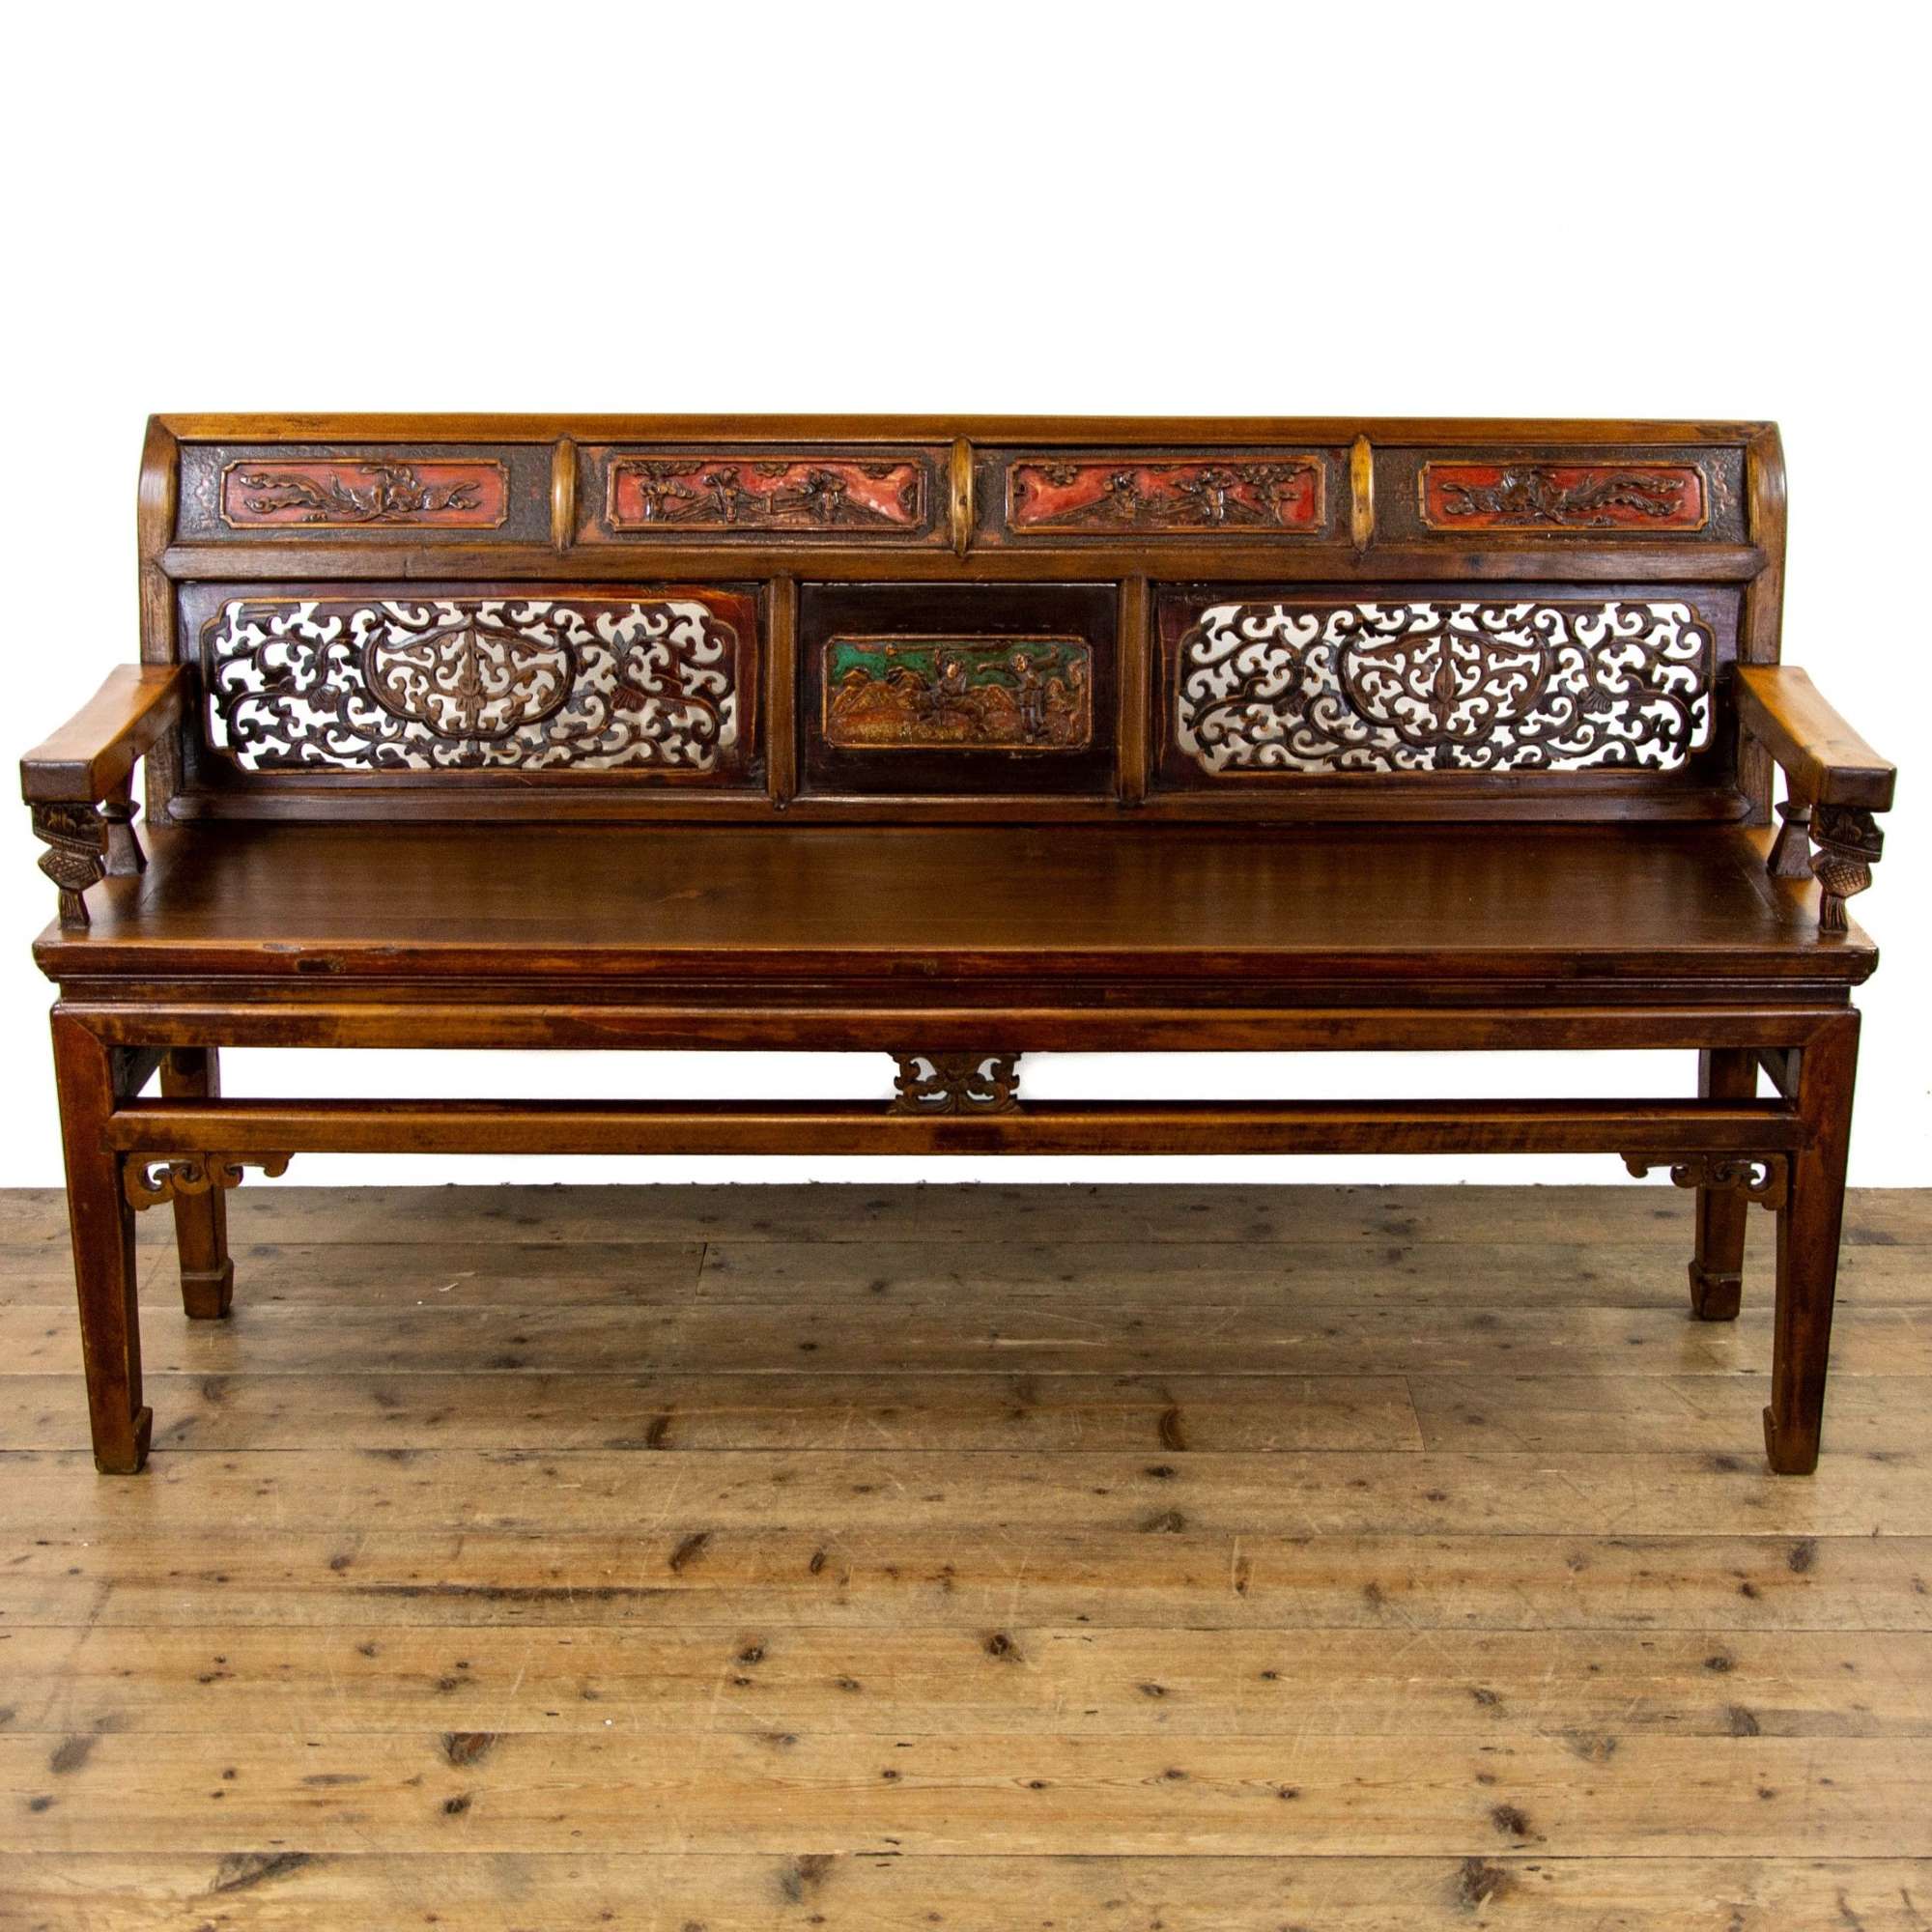 Unusual Chinese Hall Bench